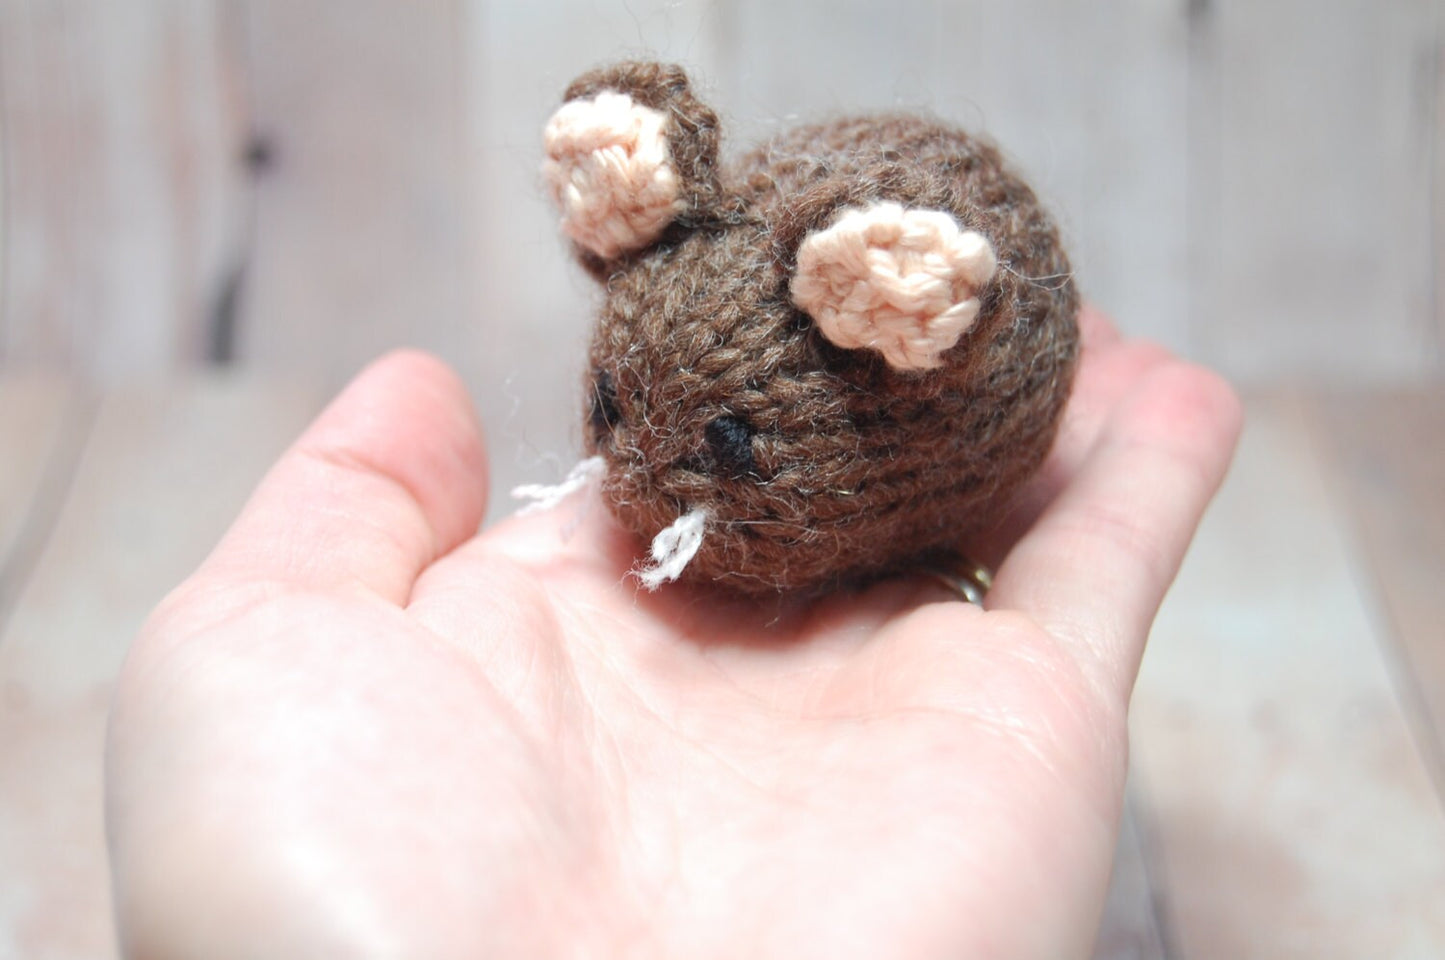 Knit Gray Brown Mouse Ornament, Mouse Stocking Stuffer